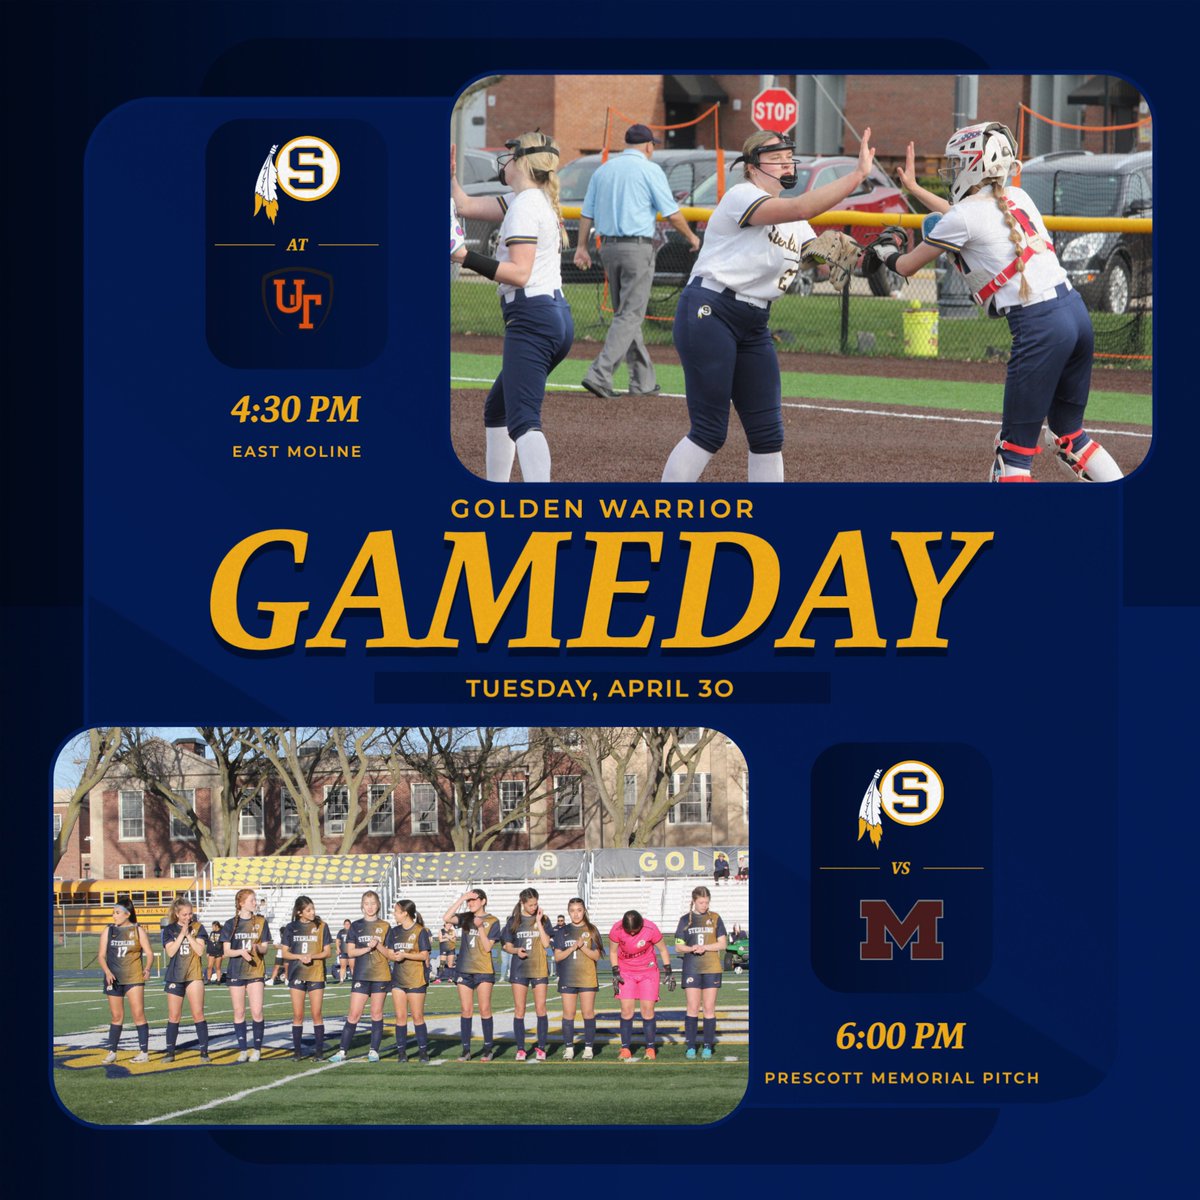 It’s Tuesday #GameDay! 🥎at United Township in a battle of the top 2 teams in the #WB6 ⚽️at home against perennial #WB6 power Moline Let’s #GOldenWARRIORS!